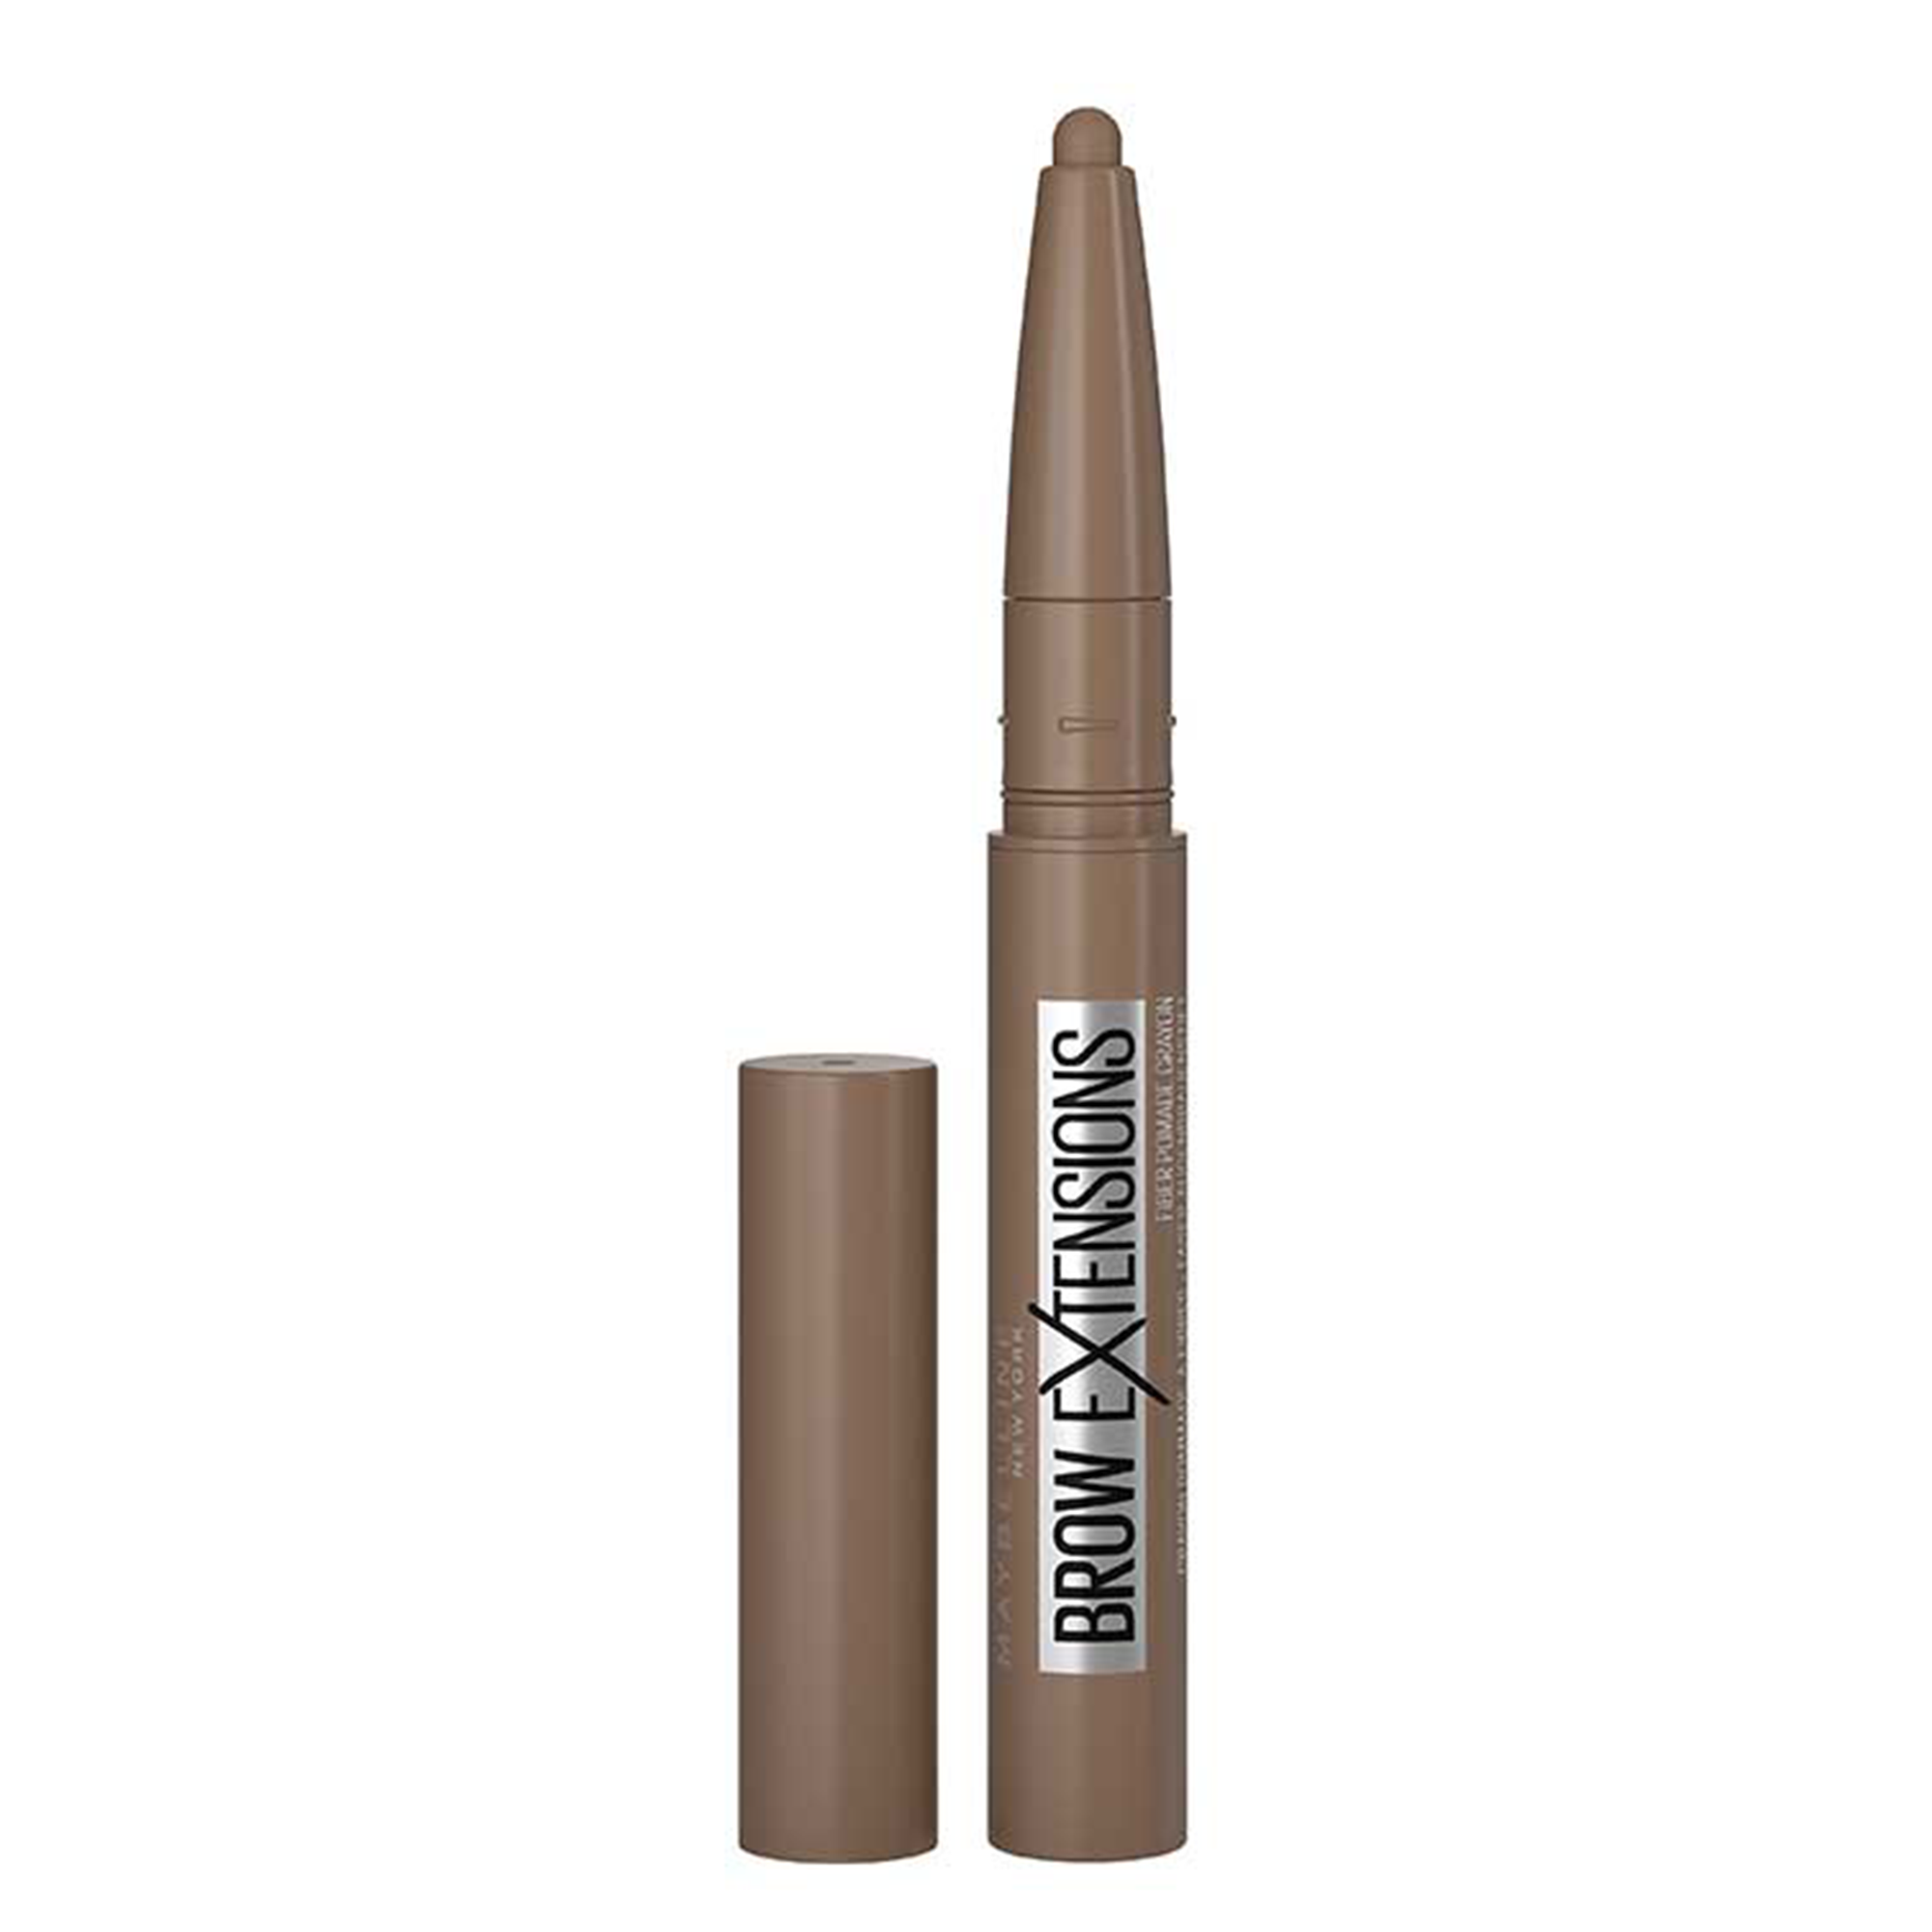 Maybelline Brow Extensions Fiber Pomade Crayon - 02 Soft Brown